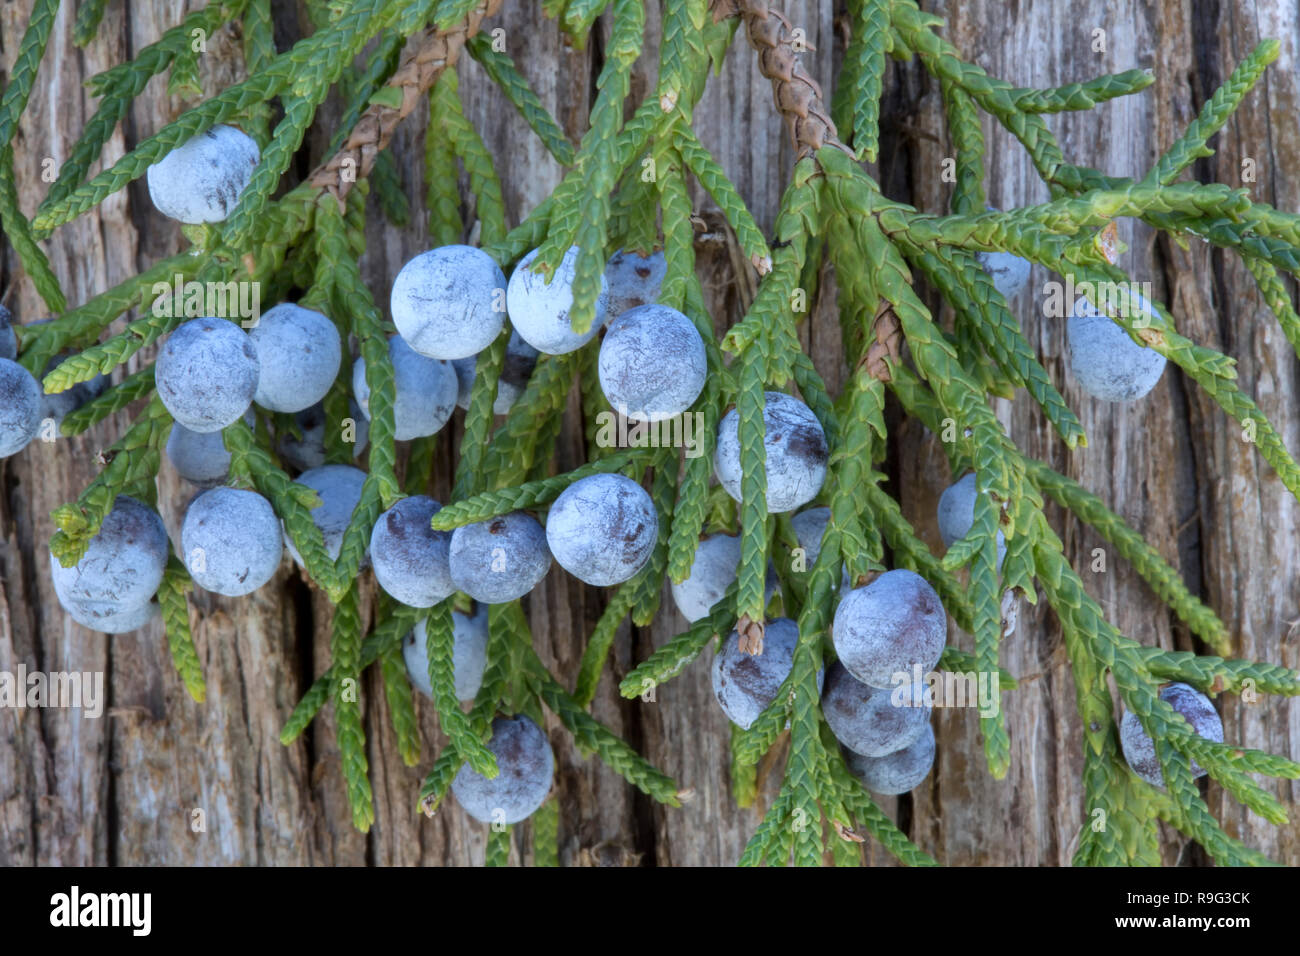 Southern Red Cedar branch displaying young foliage, with mature fleshy blue female cones 'Juniperus silicicola'. Stock Photo